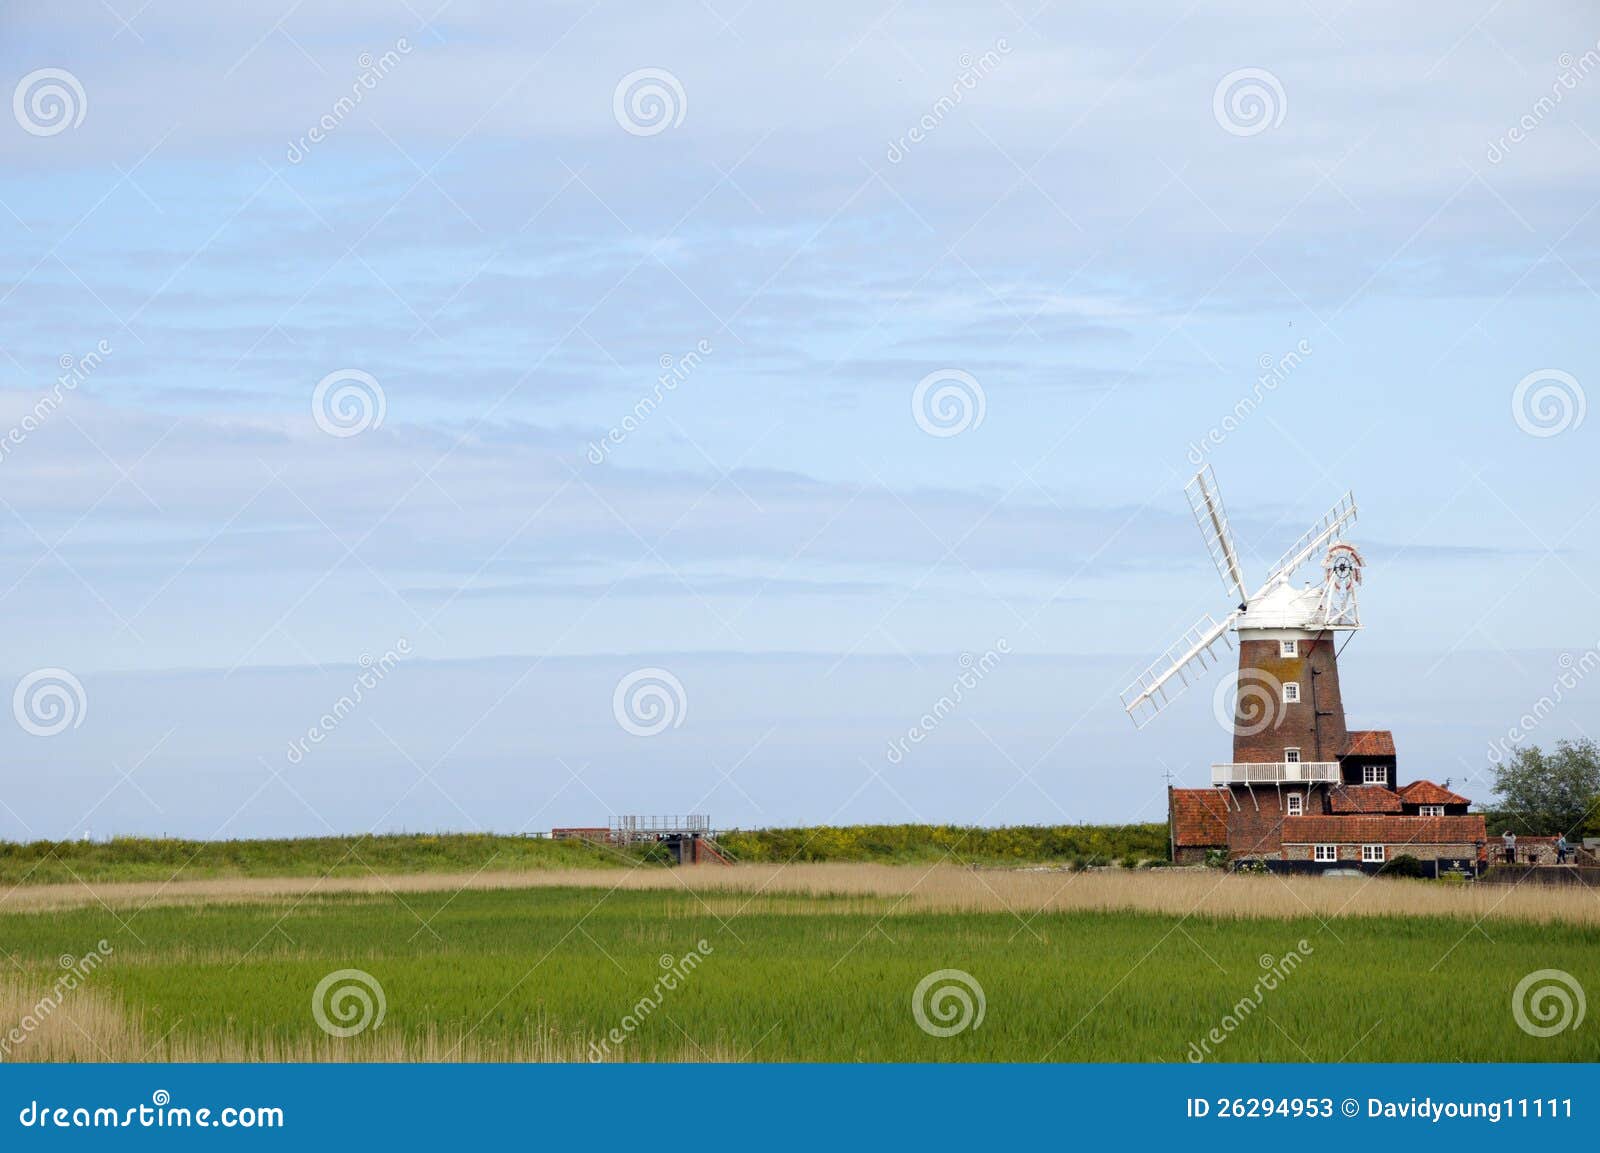 Windmill across marshes at Cley, Norfolk.